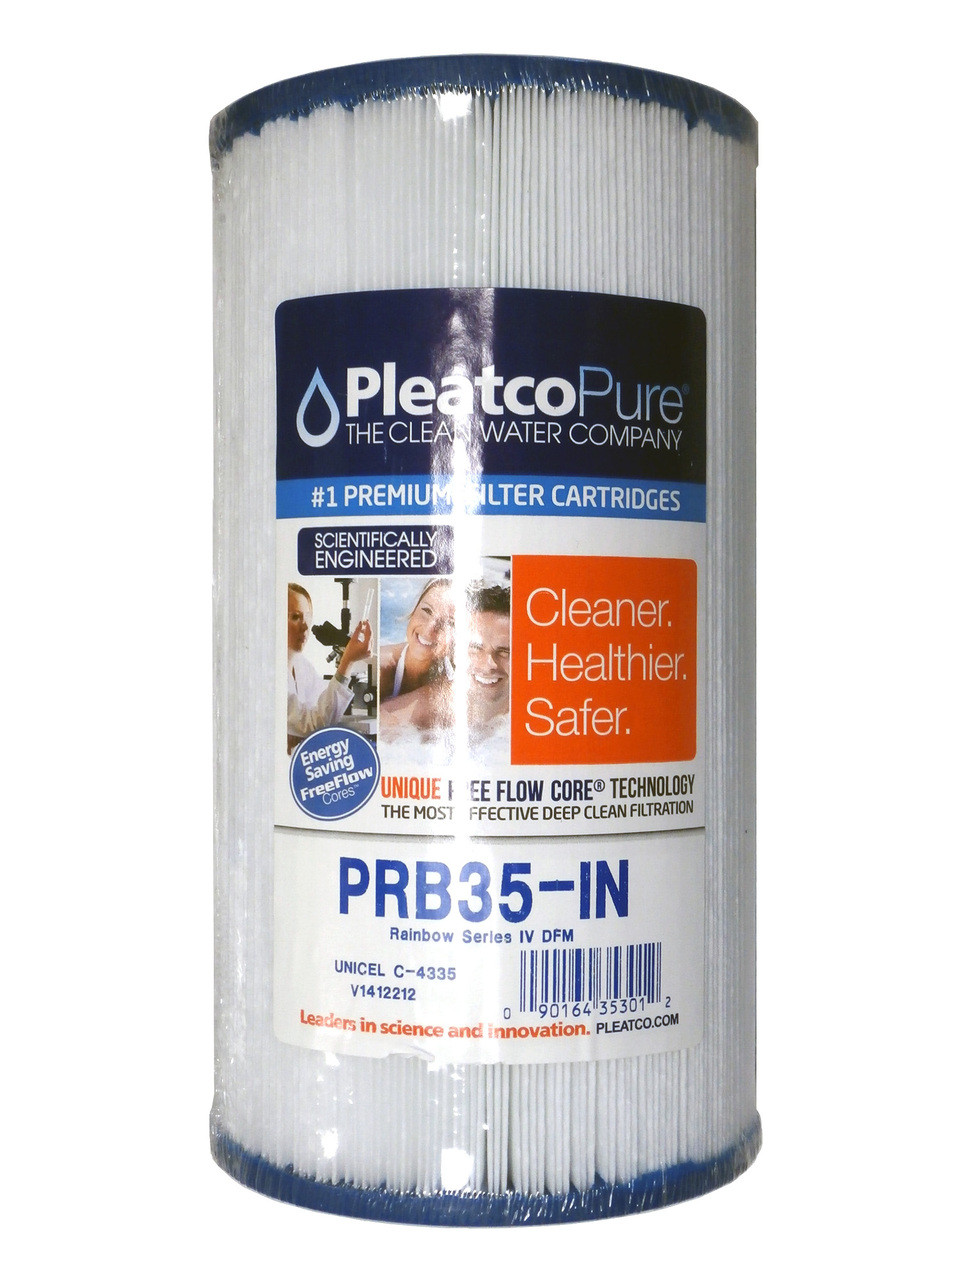 Master Spa - X268300 - PRB35-IN Filter Element 35 Sq. Ft. Filter - Side View with Packaging

